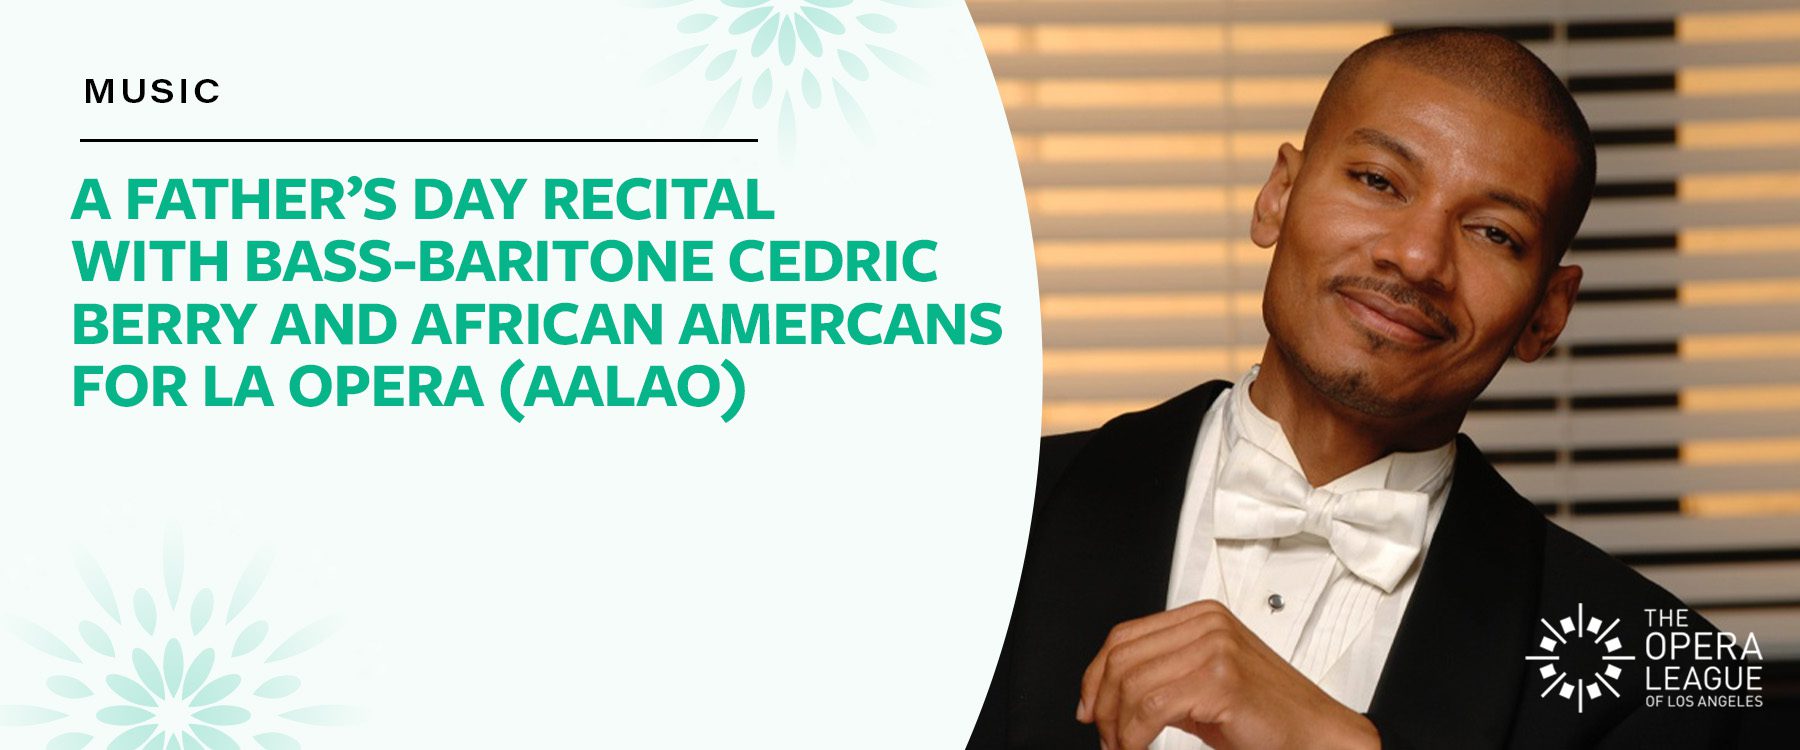 A Father's Day Recital with Bass-Baritone Cedric Berry and African Americans for LA Opera